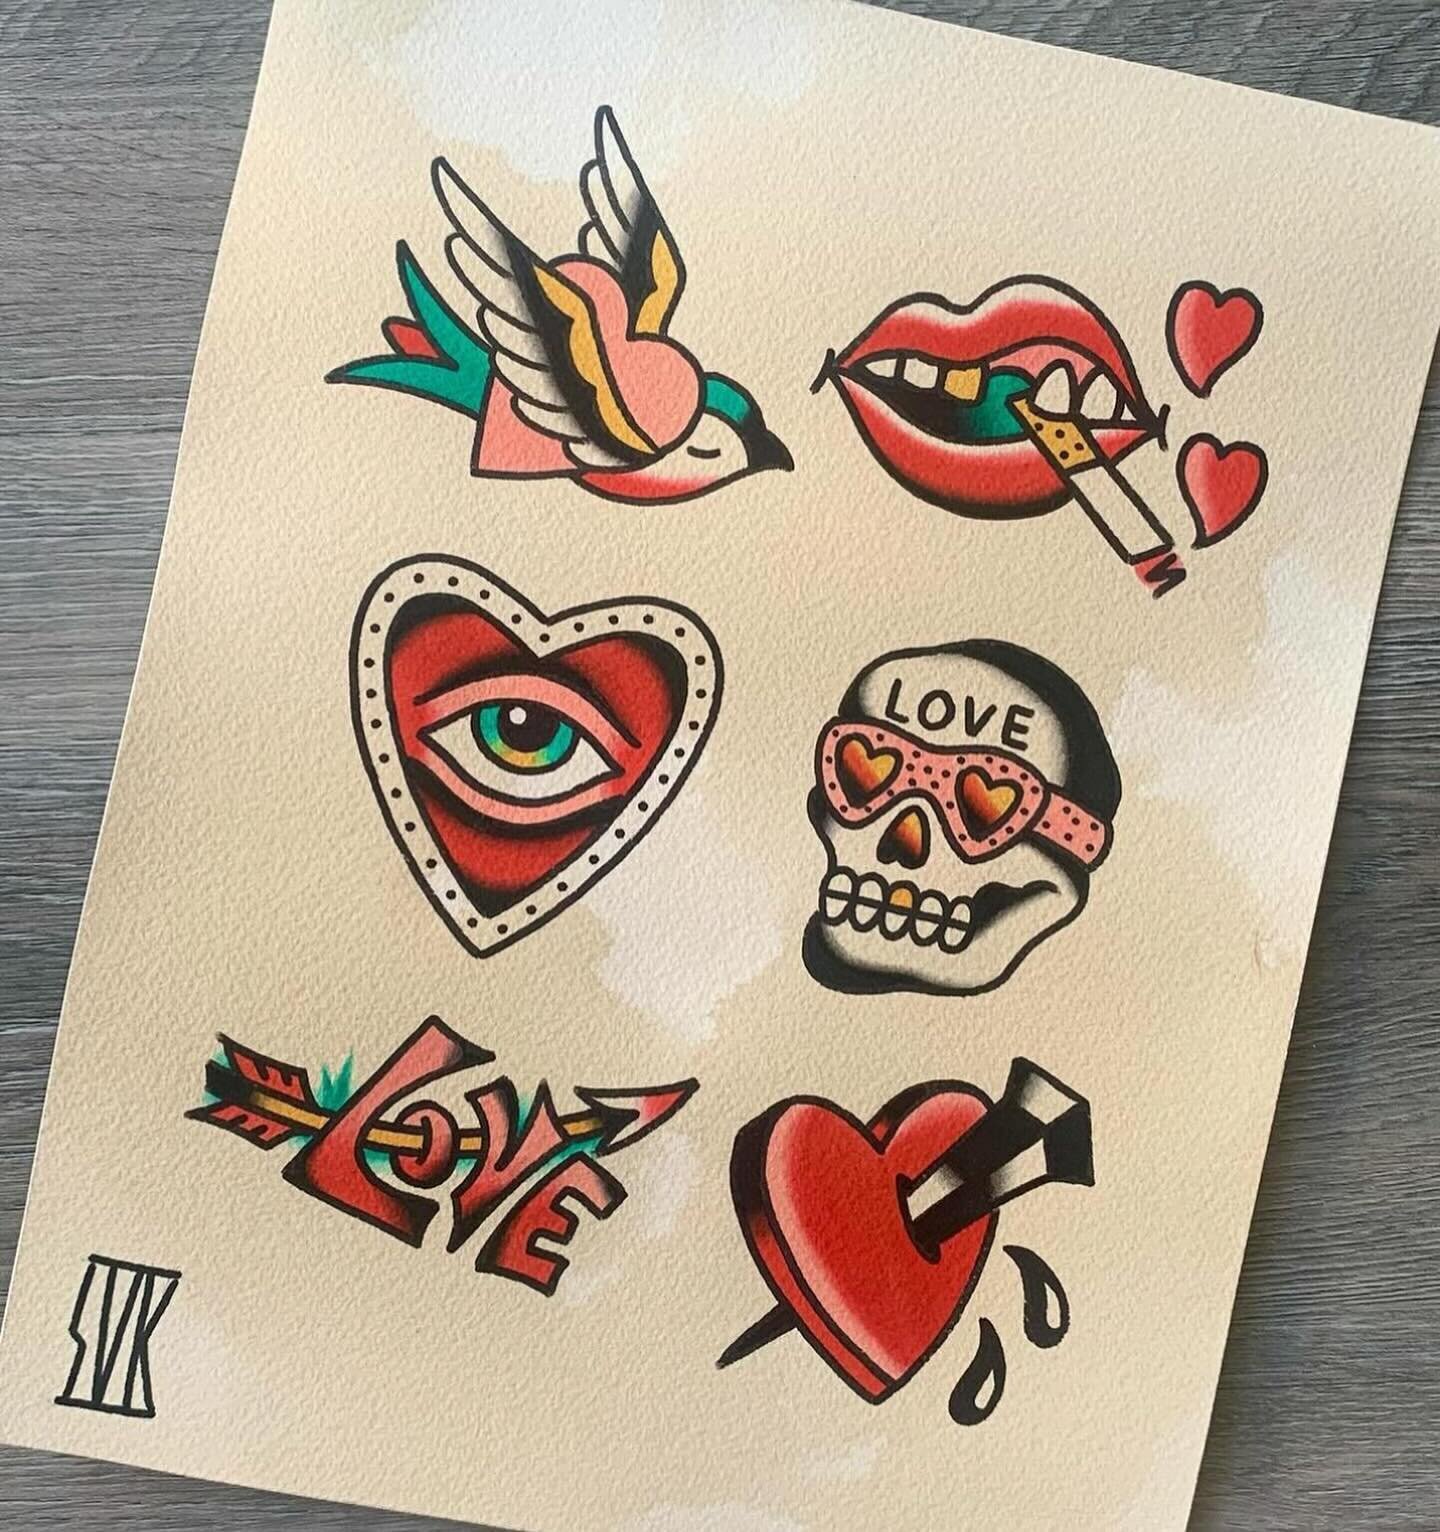 @vankirk_tattoo &lsquo;s sheet for our upcoming valentines flash day! Please see his most recent post for more info and to book! ❤️ ❤️ ❤️